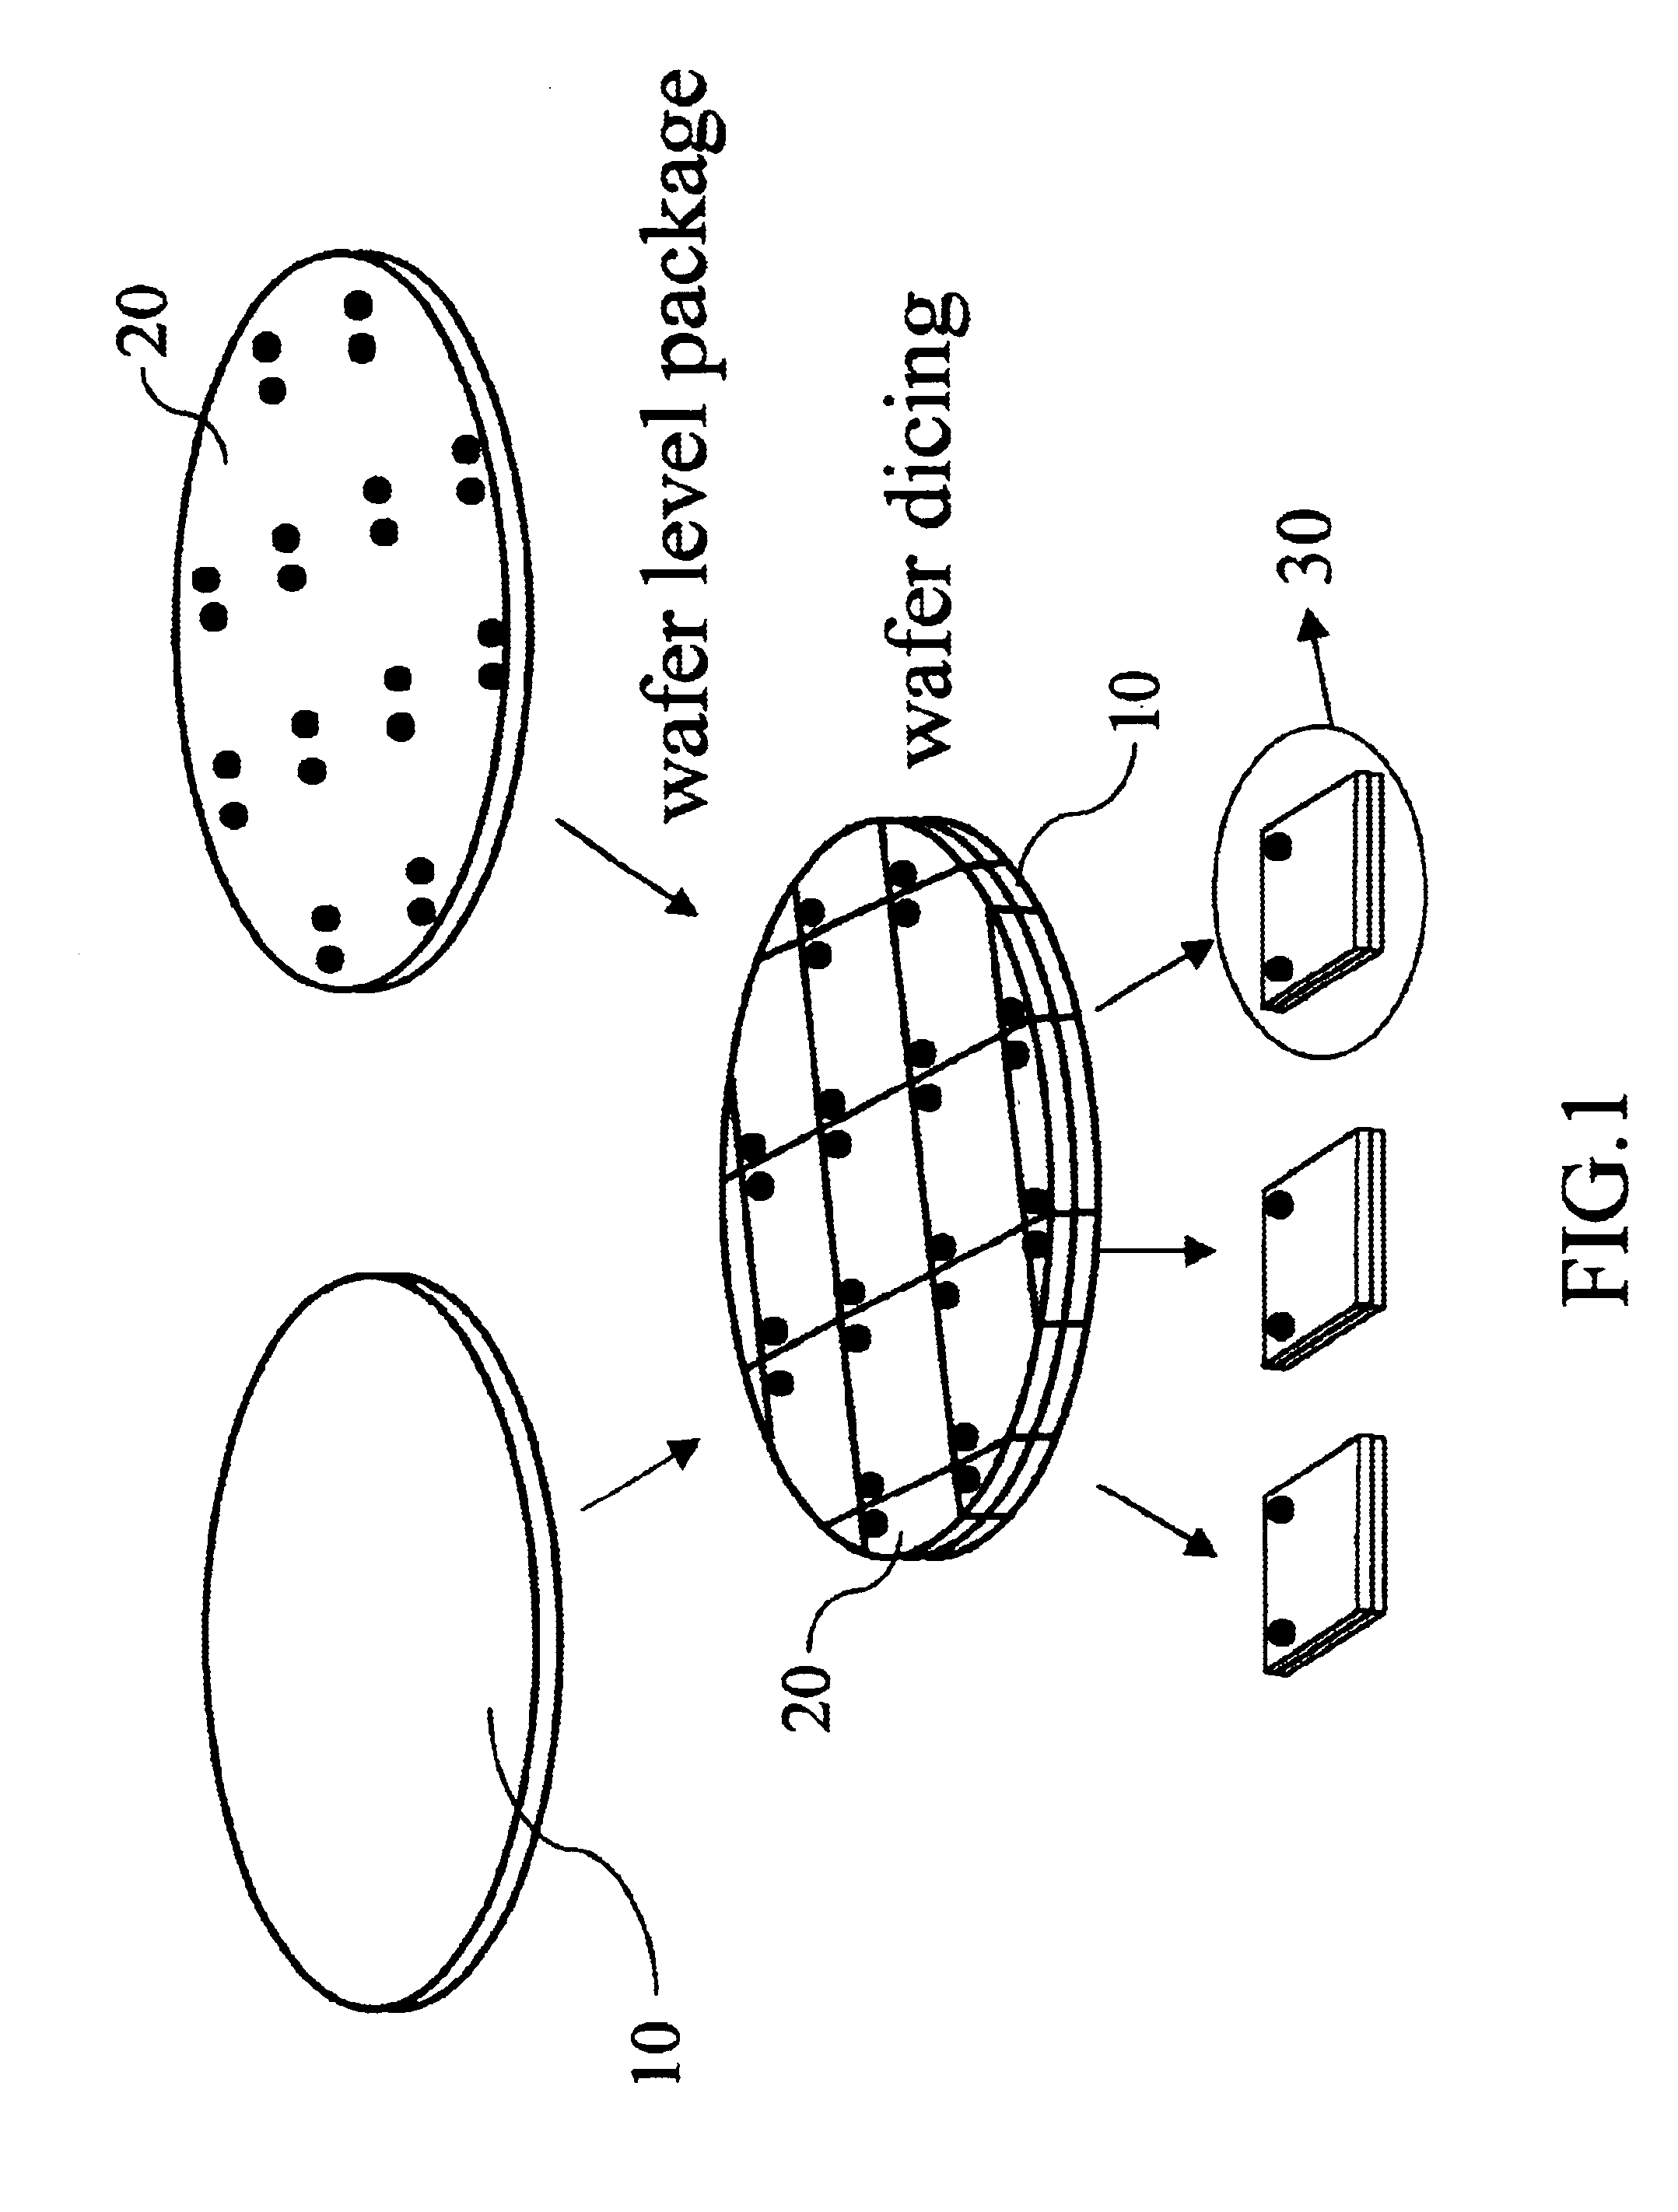 Wafer level packaging of micro electromechanical device